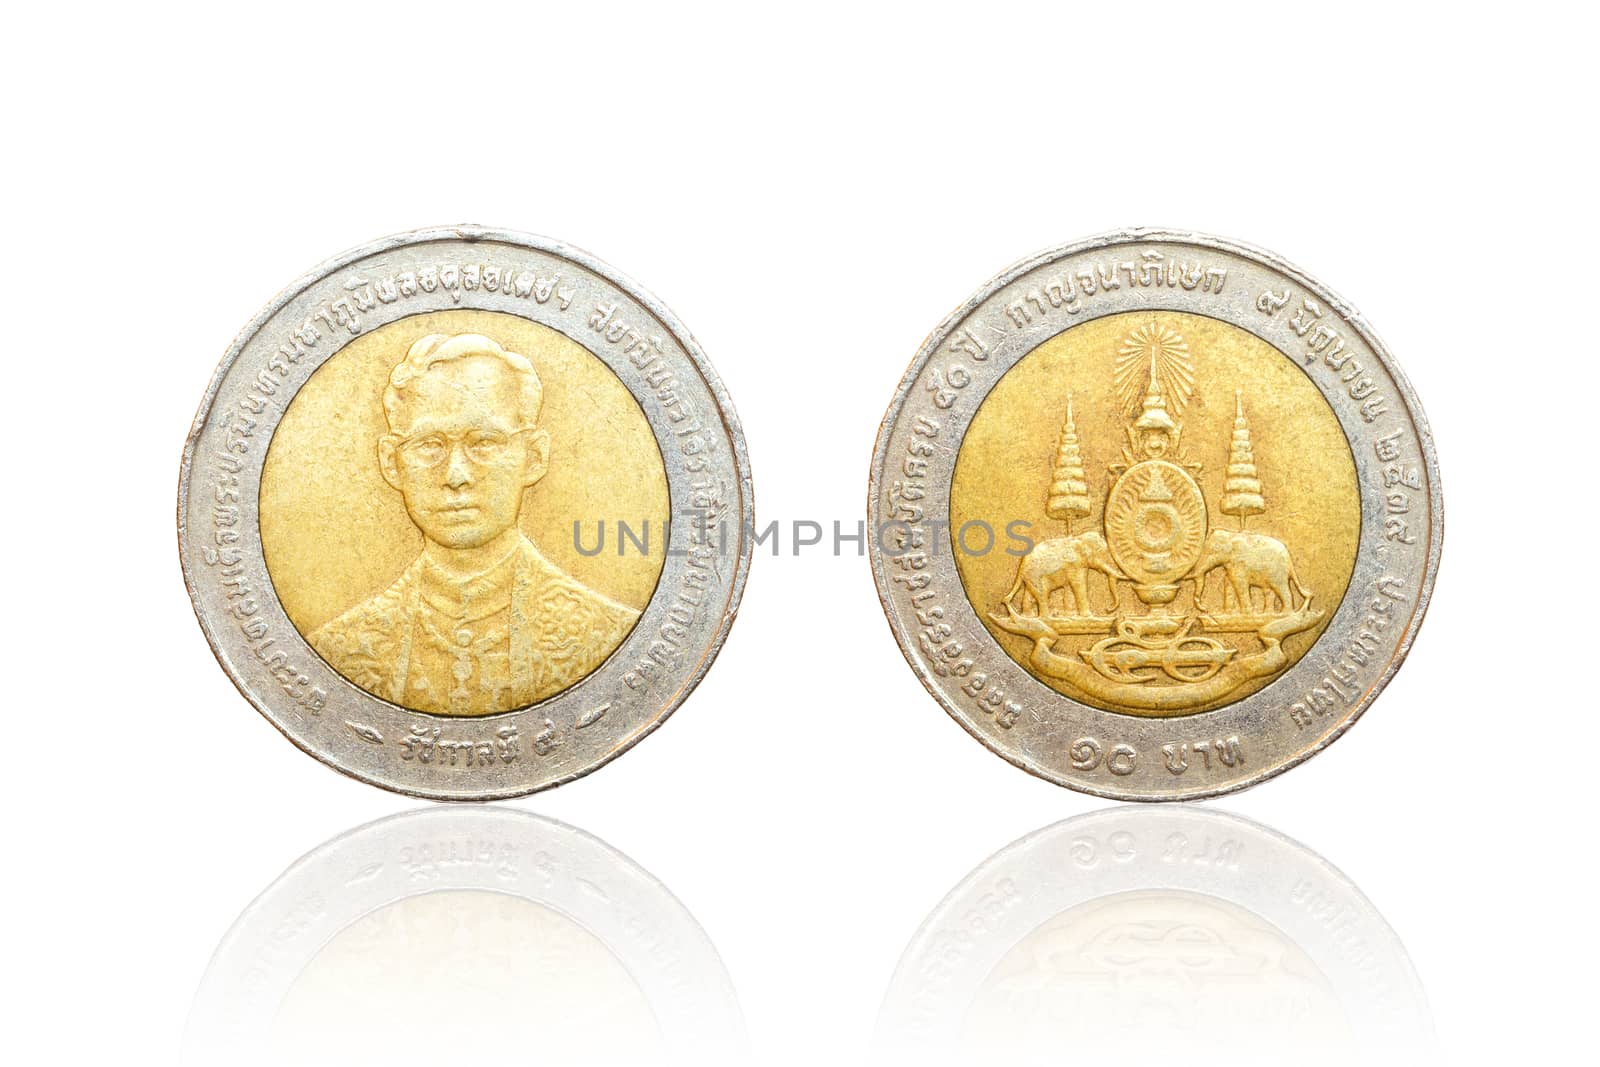 Front and back of Thai coin 10 baht reflect on white background.